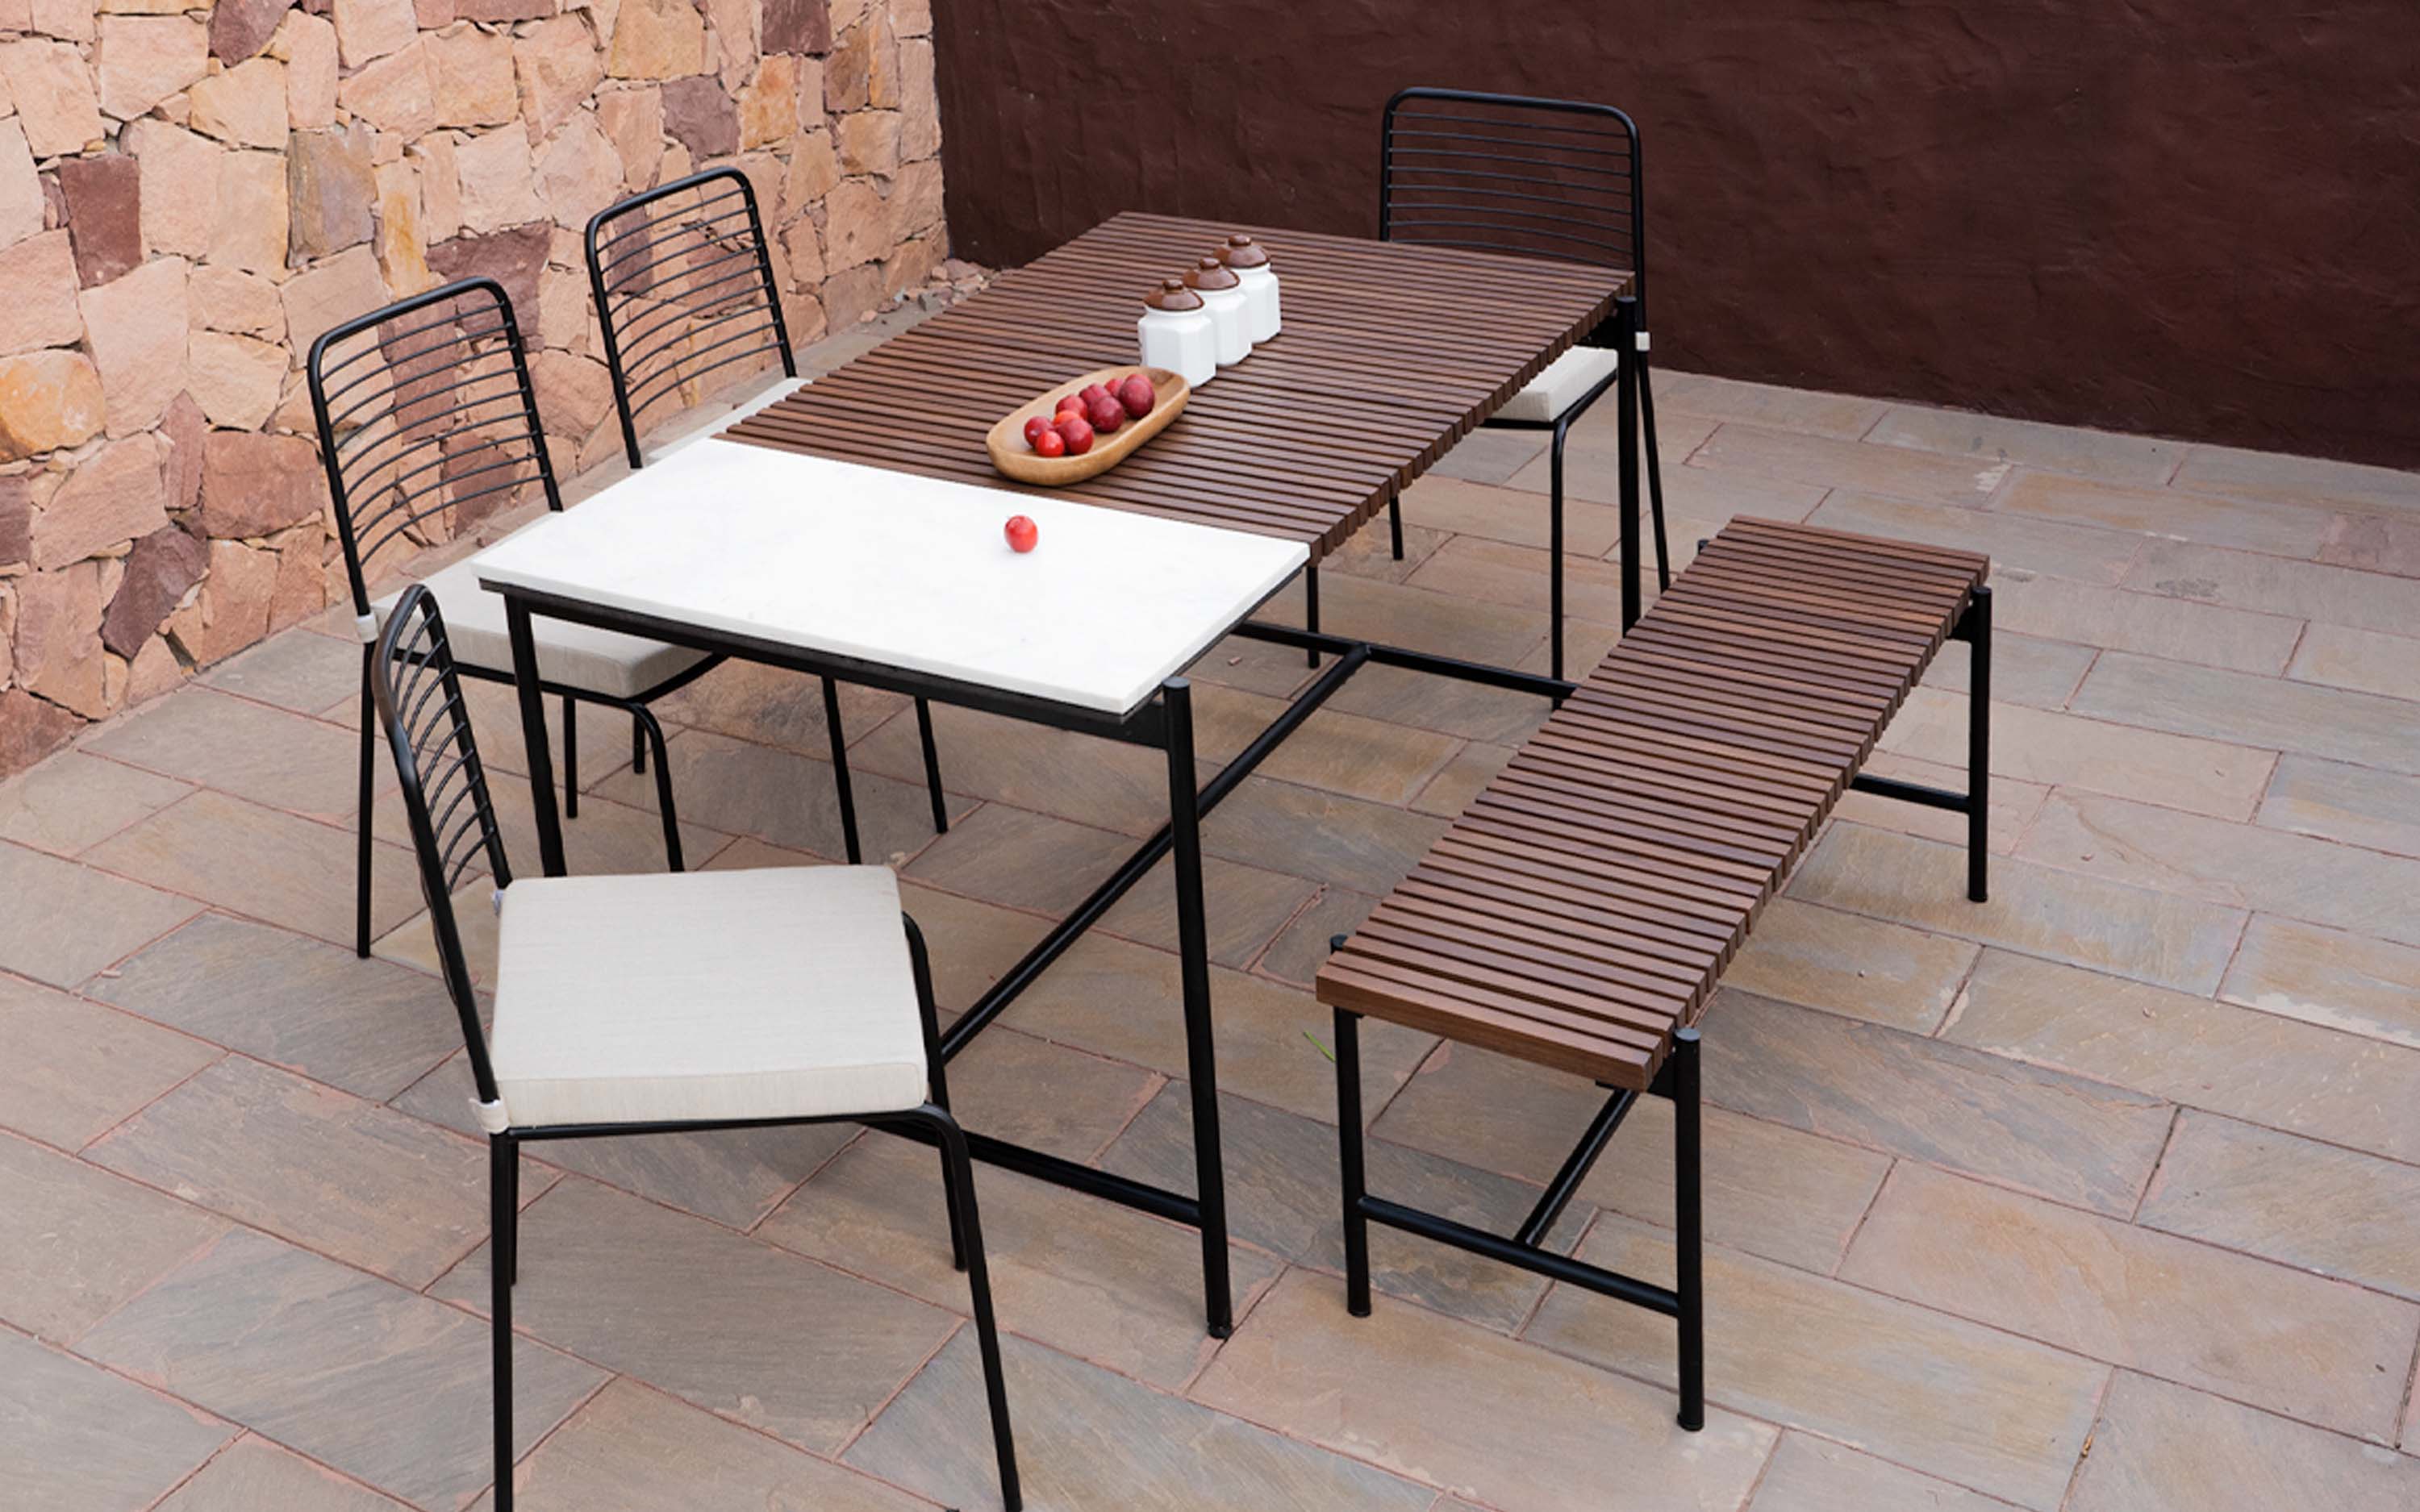 Covent Garden Outdoor Marble Top Dining Table With 4 Chairs and Bench. Orange Tree Home